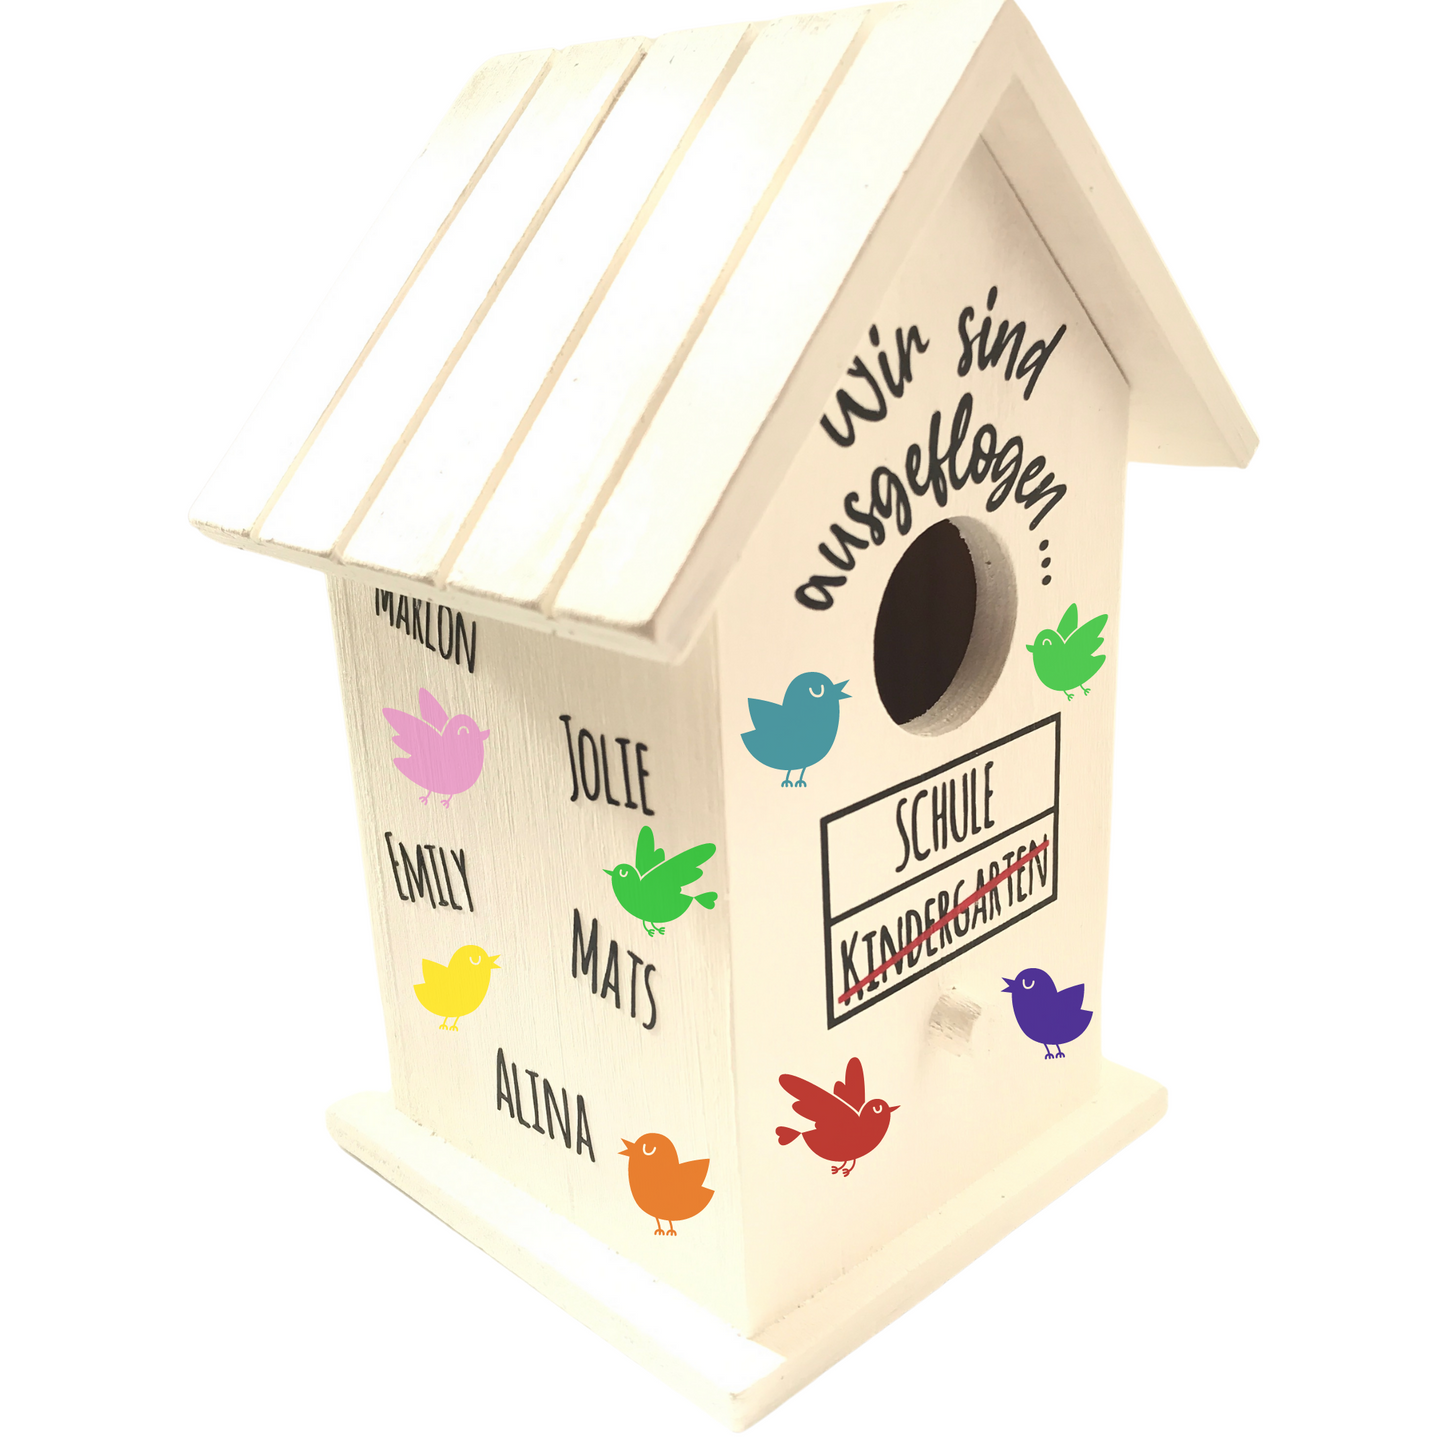 Bird house - kindergarten "We flew out" - farewell gift for educators - personalized with children's names